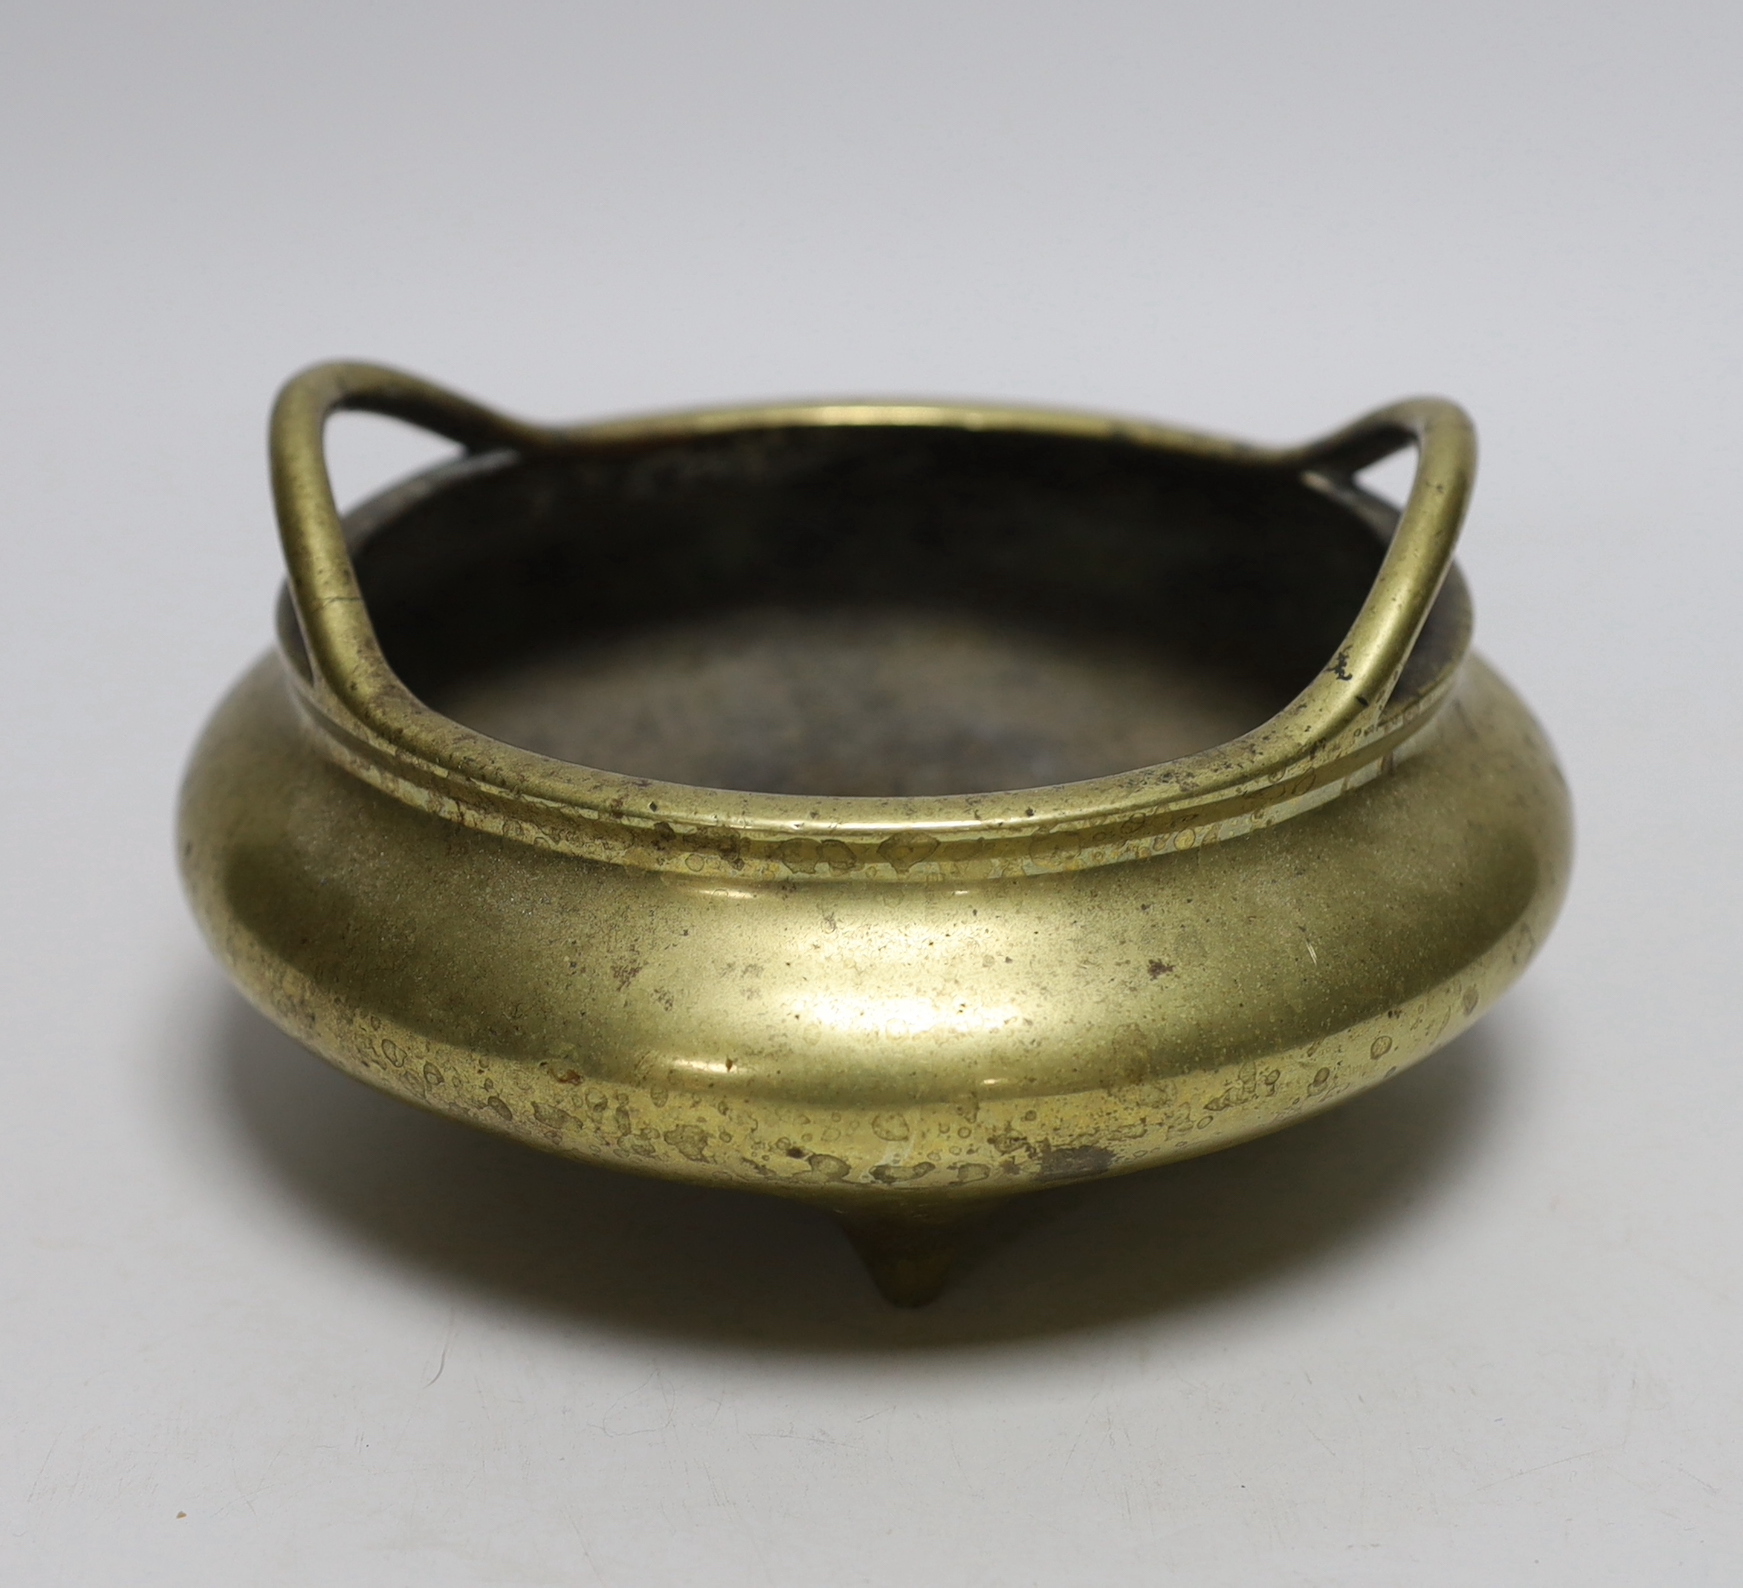 A late 19th century Chinese bronze censer with twin handles, apocryphal Xuande mark, 17.5cm in diameter